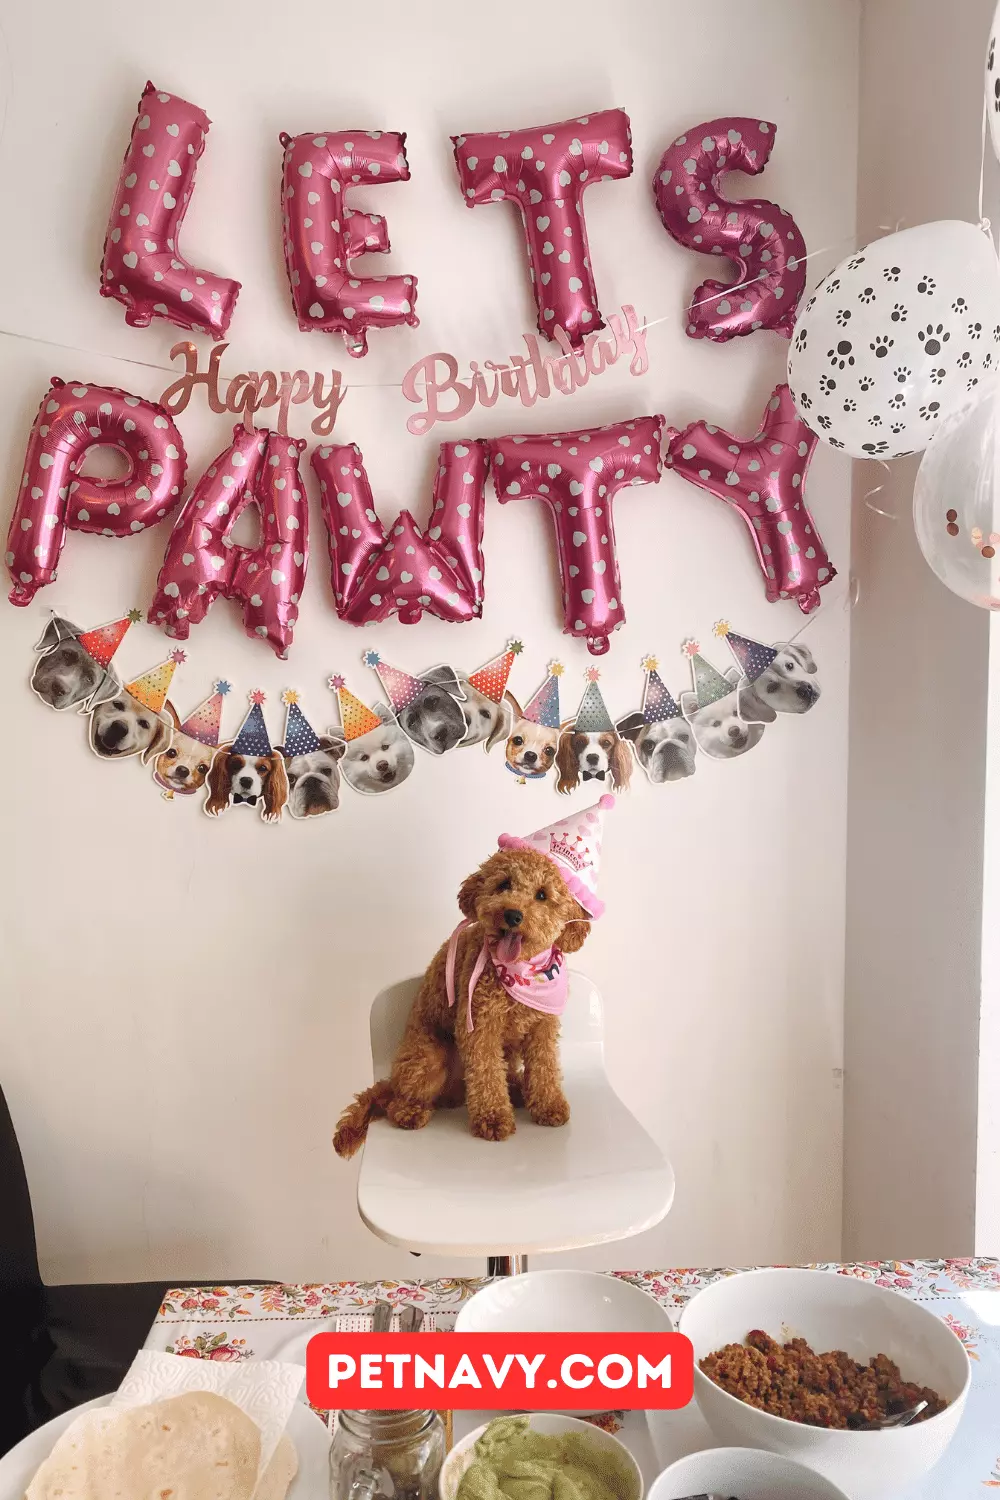 Dog Birthday Party Themes 7 Best Ideas to Celebrate